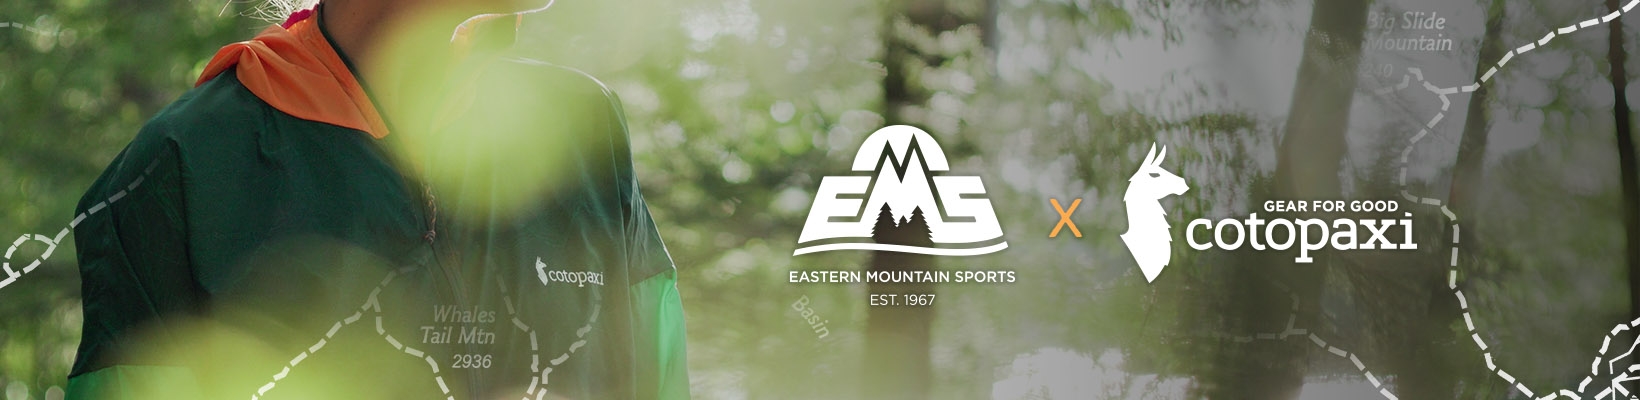 Eastern Mountain Sports to Partner with Cotopaxi on Product Collaboration for the Adirondack Mountain Club